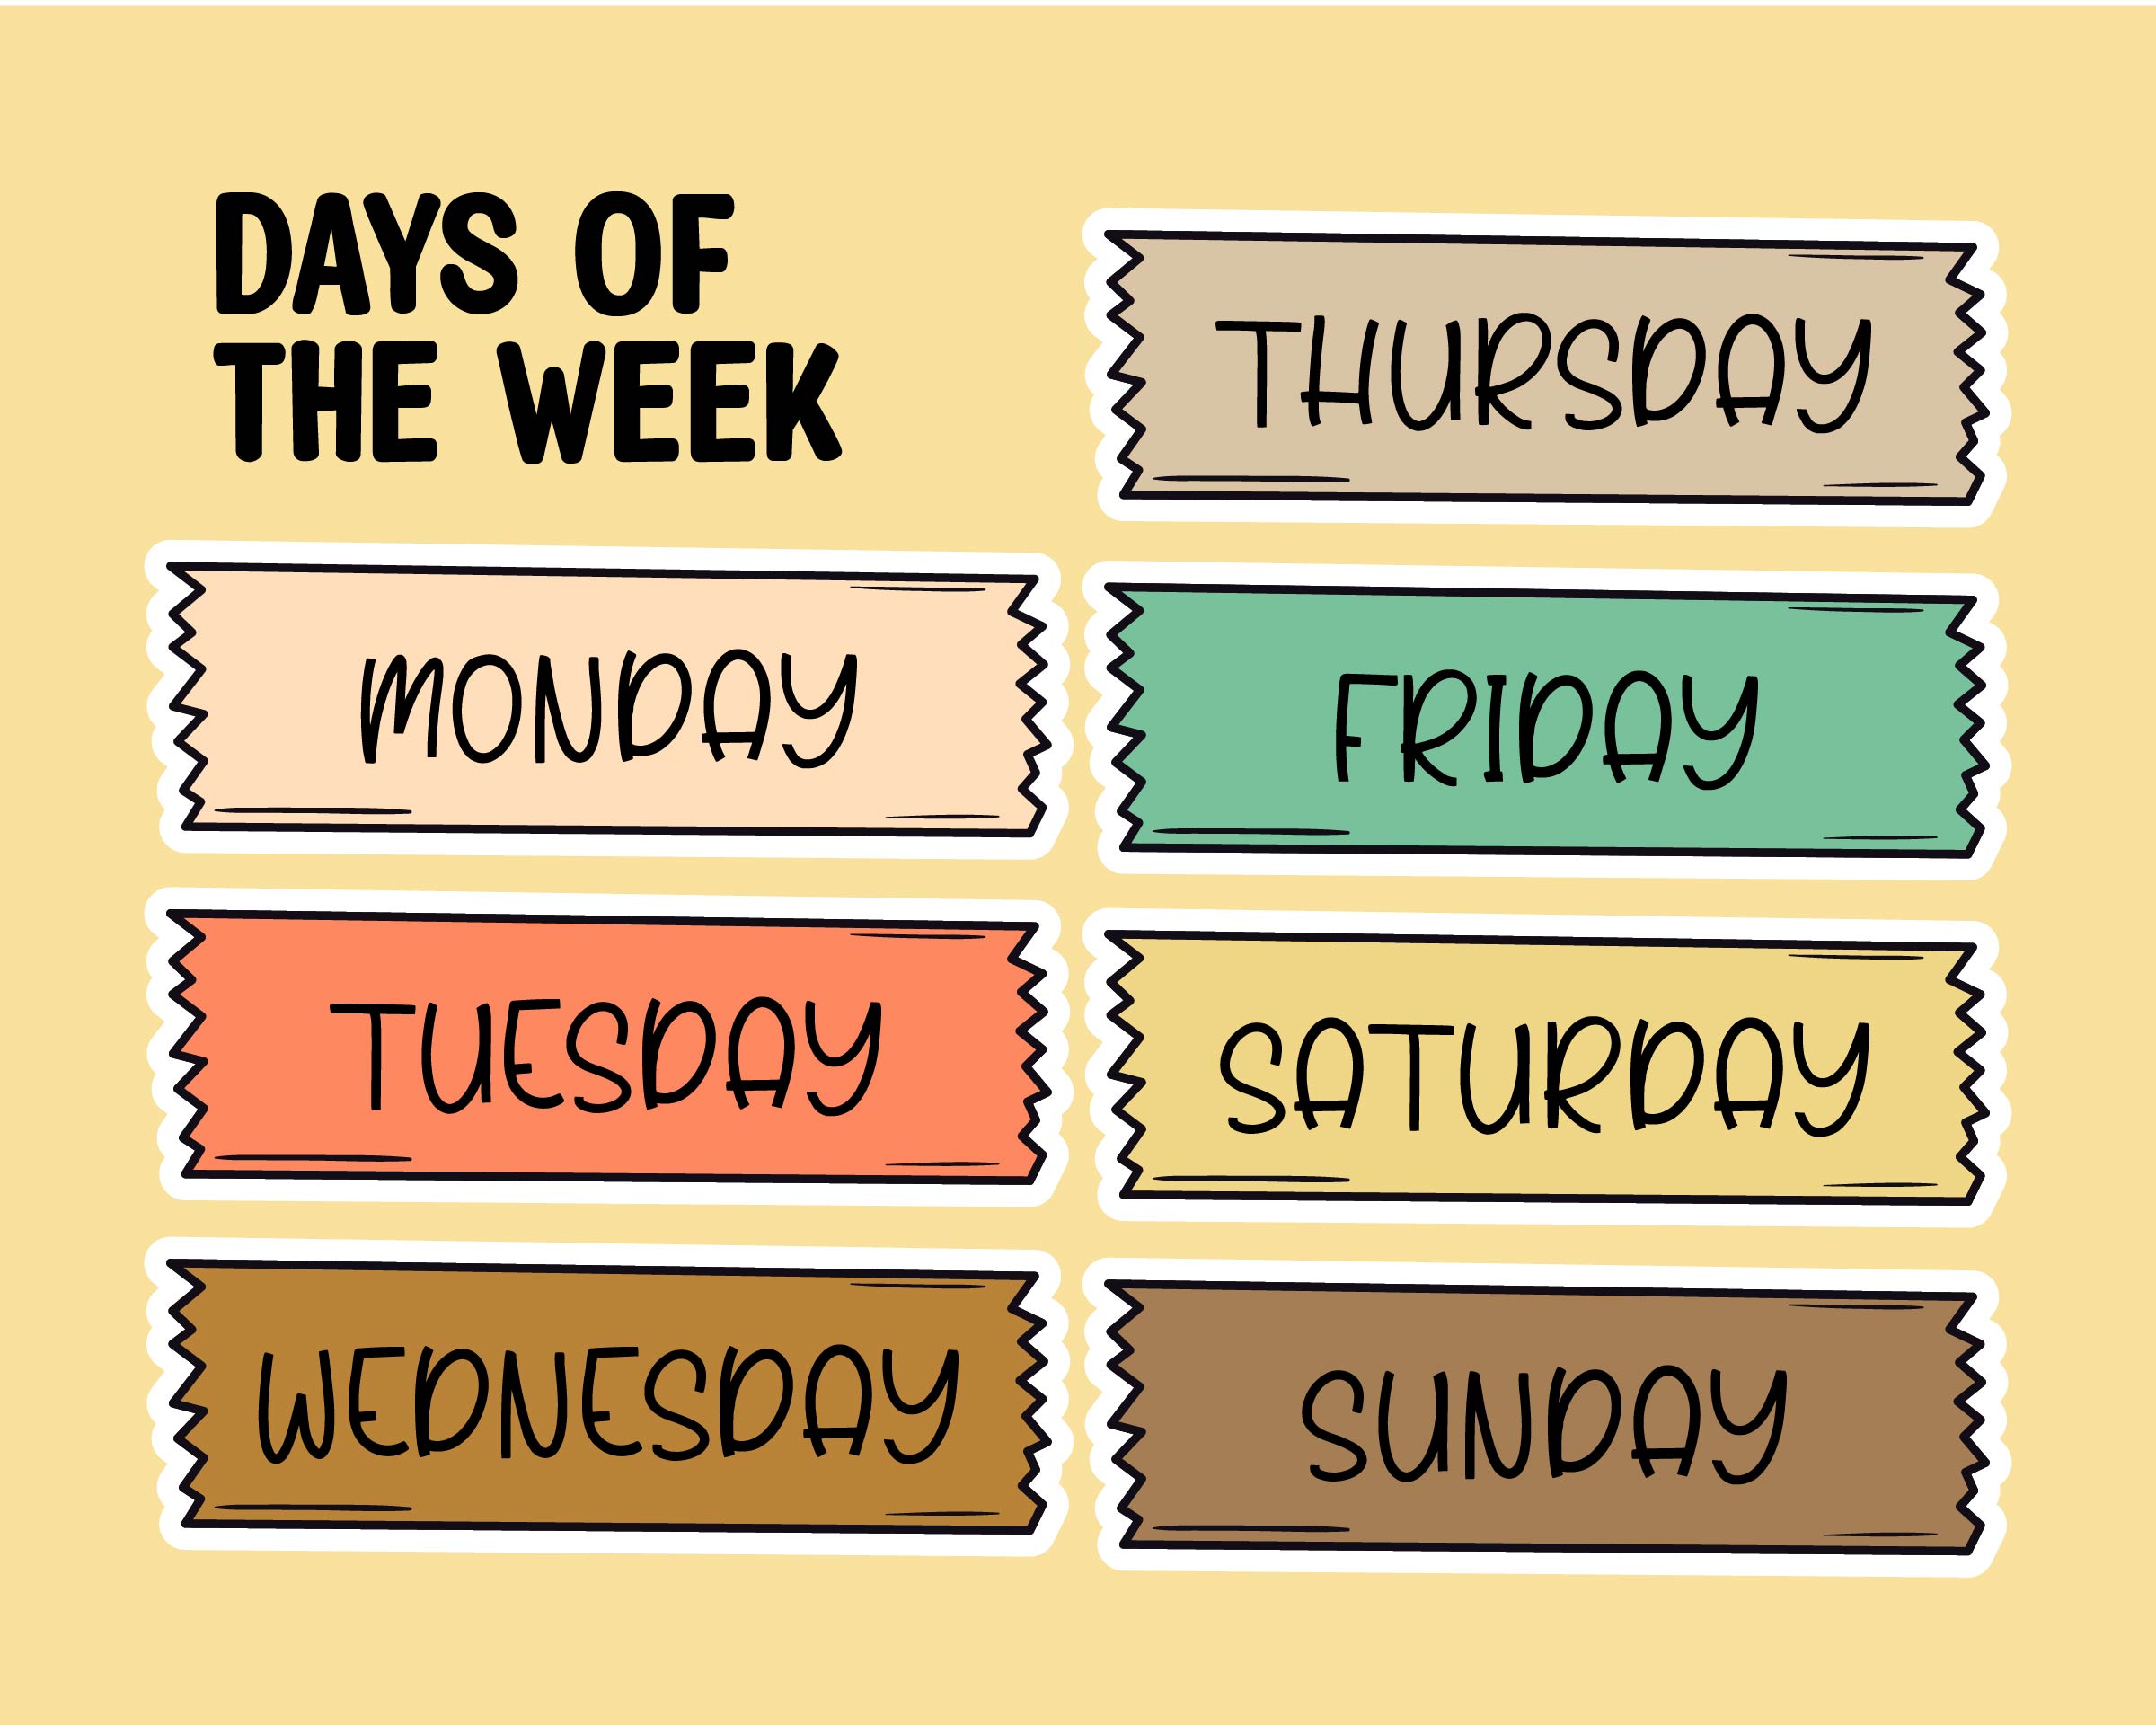 7 Best Images of Printable Days Of The Week Chart Free Printable Days